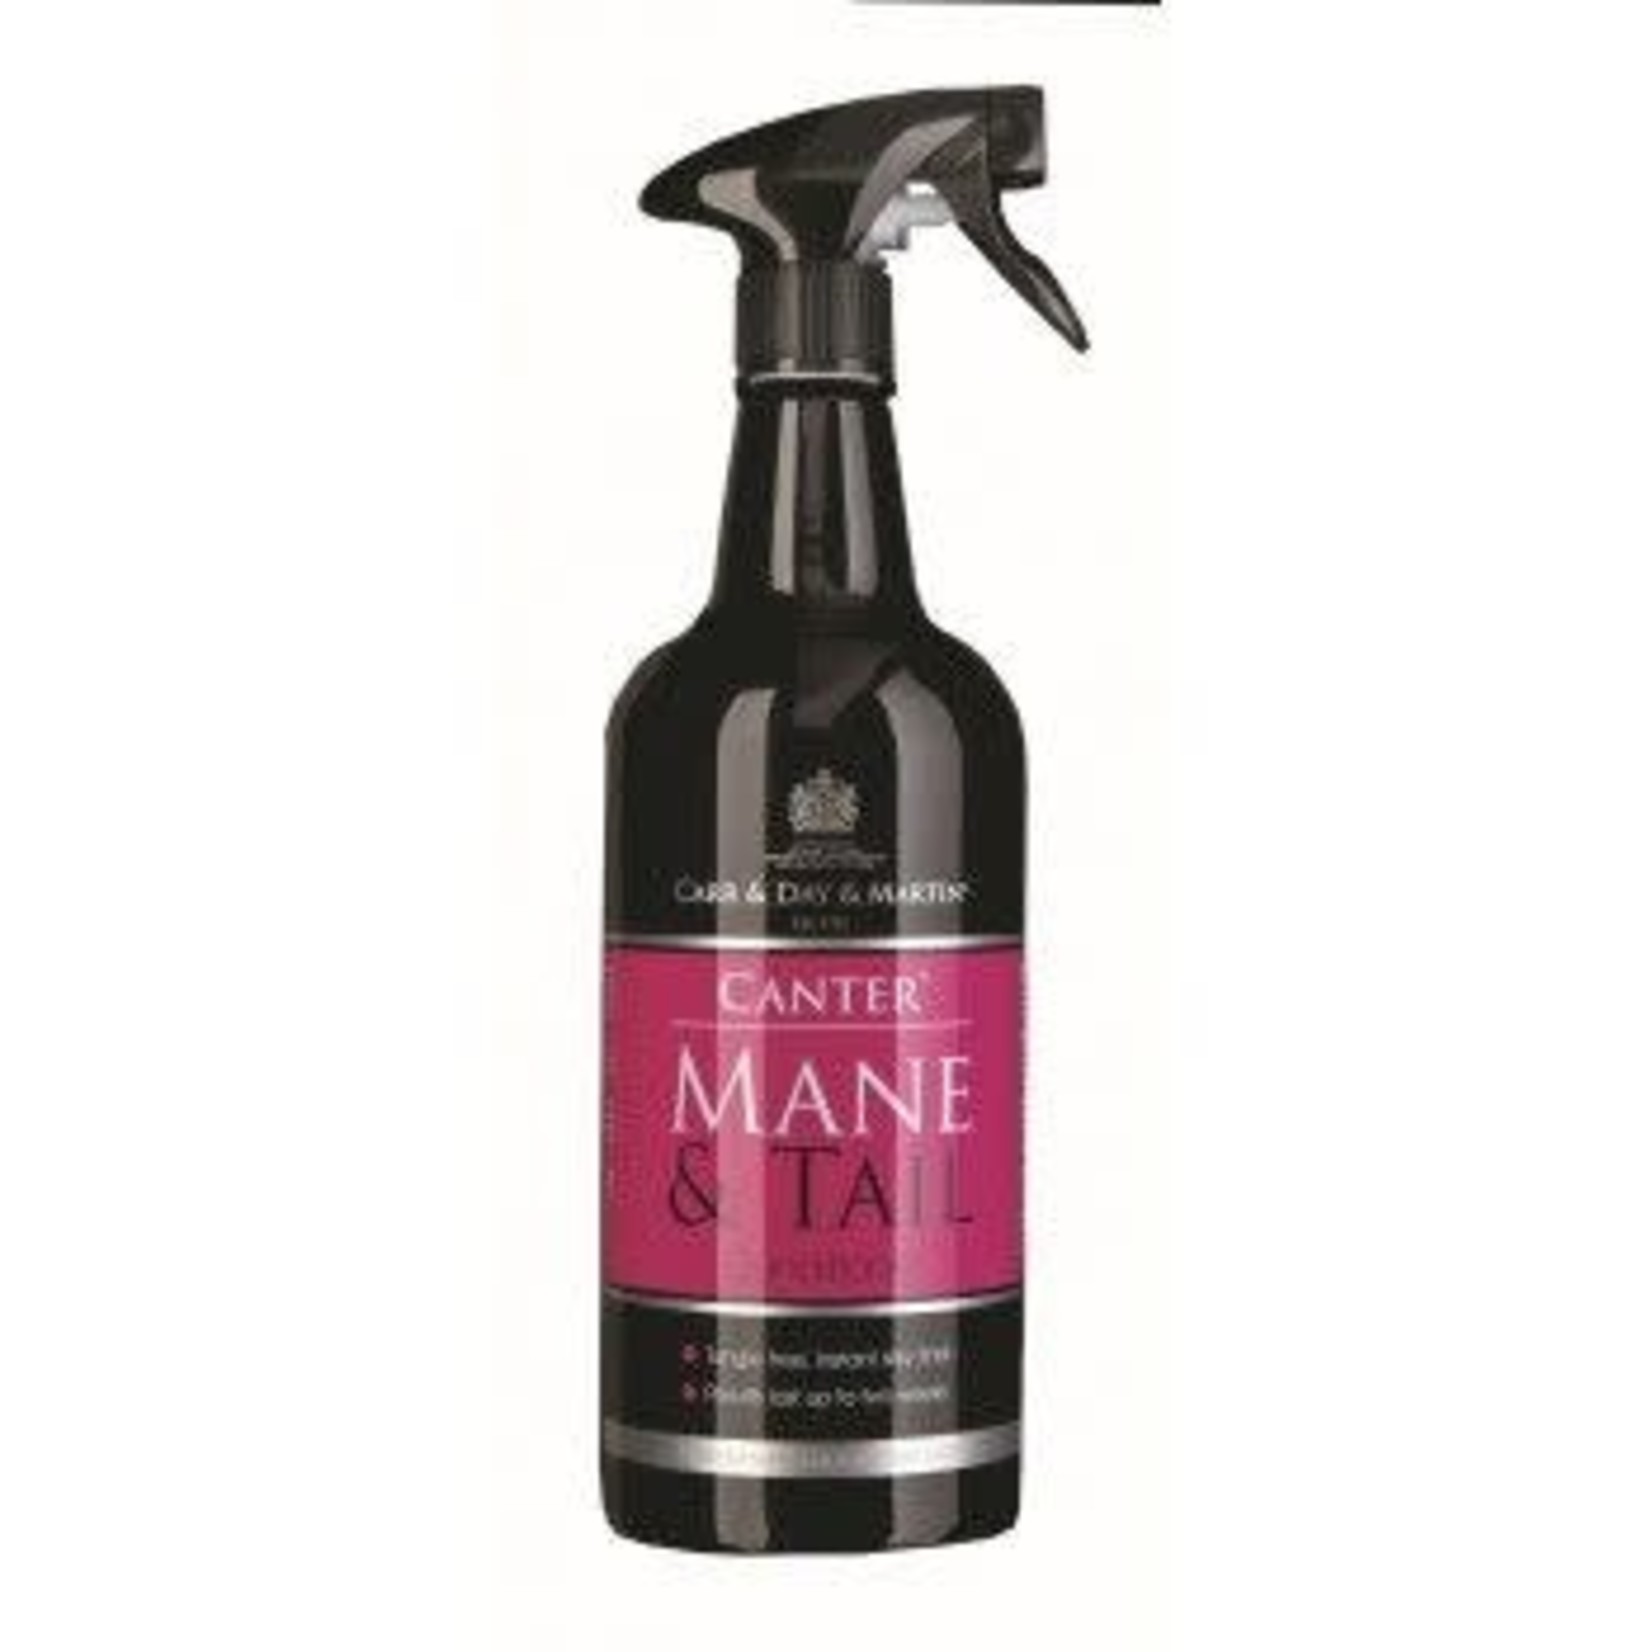 Carr & Day Martin Canter Mane & Tail Conditioner 1L